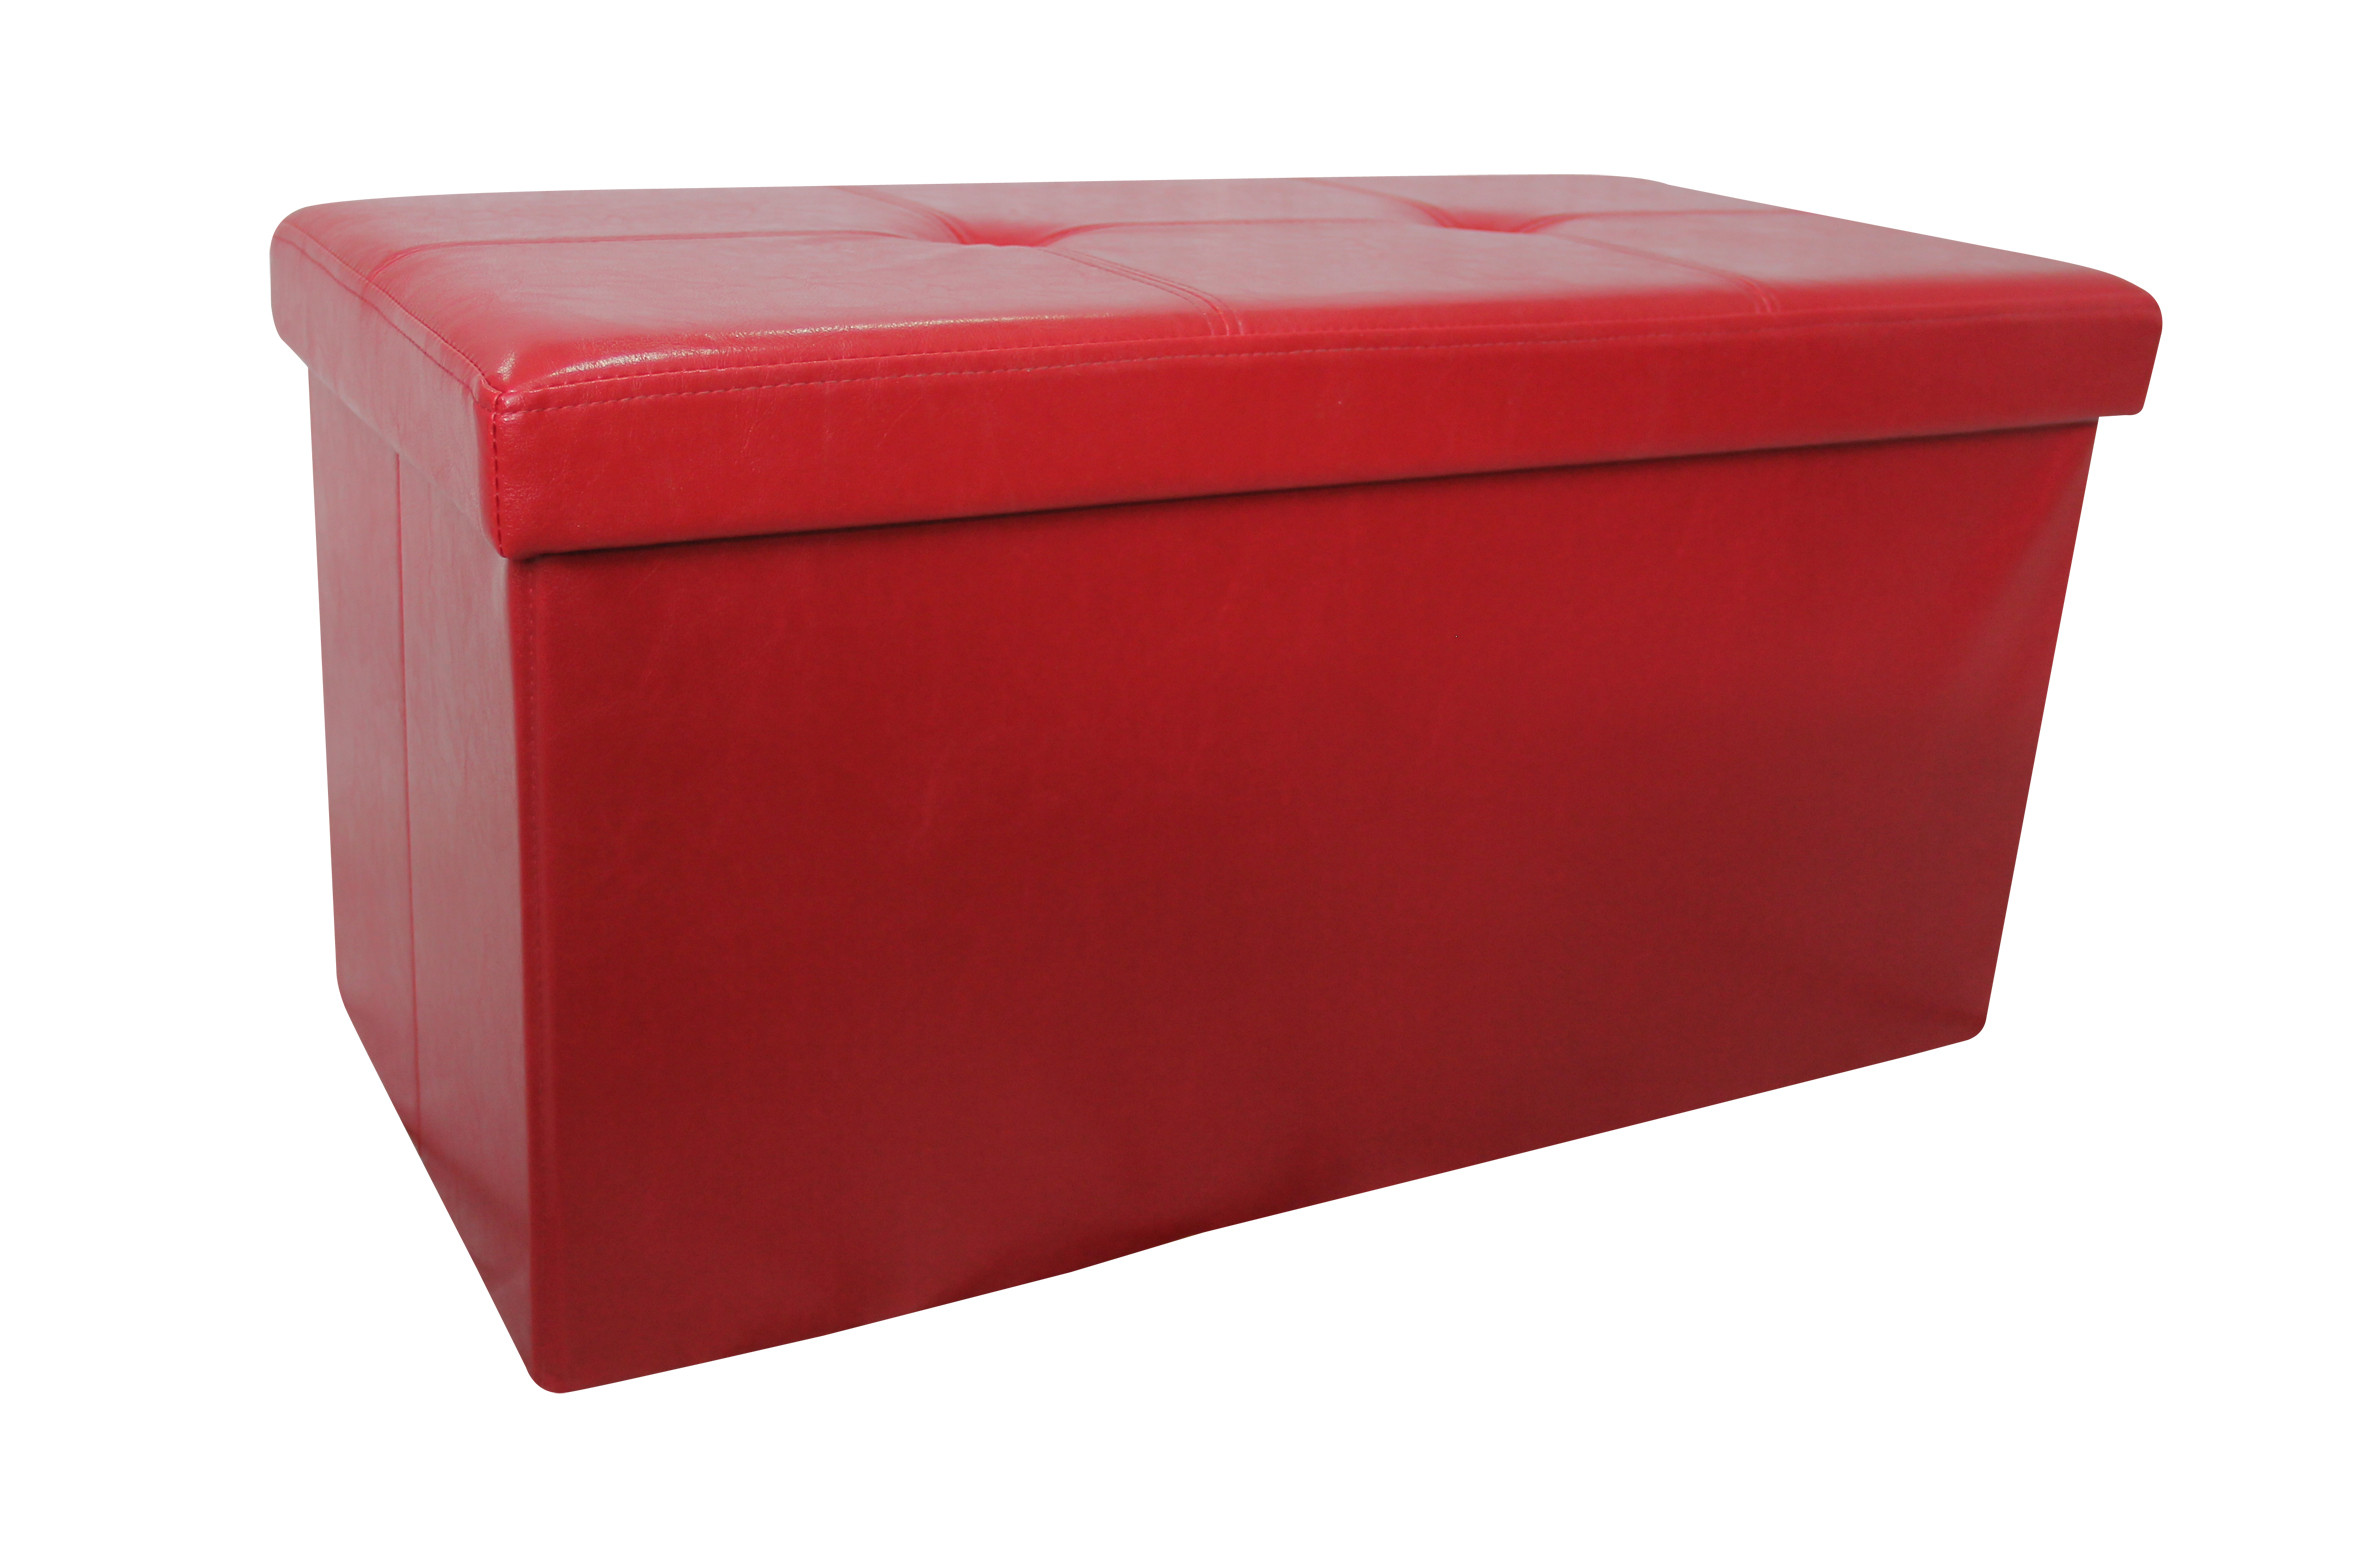 Burgundy Storage Bench
 Storage Solutions Burgundy 30" Double Faux Leather Folding